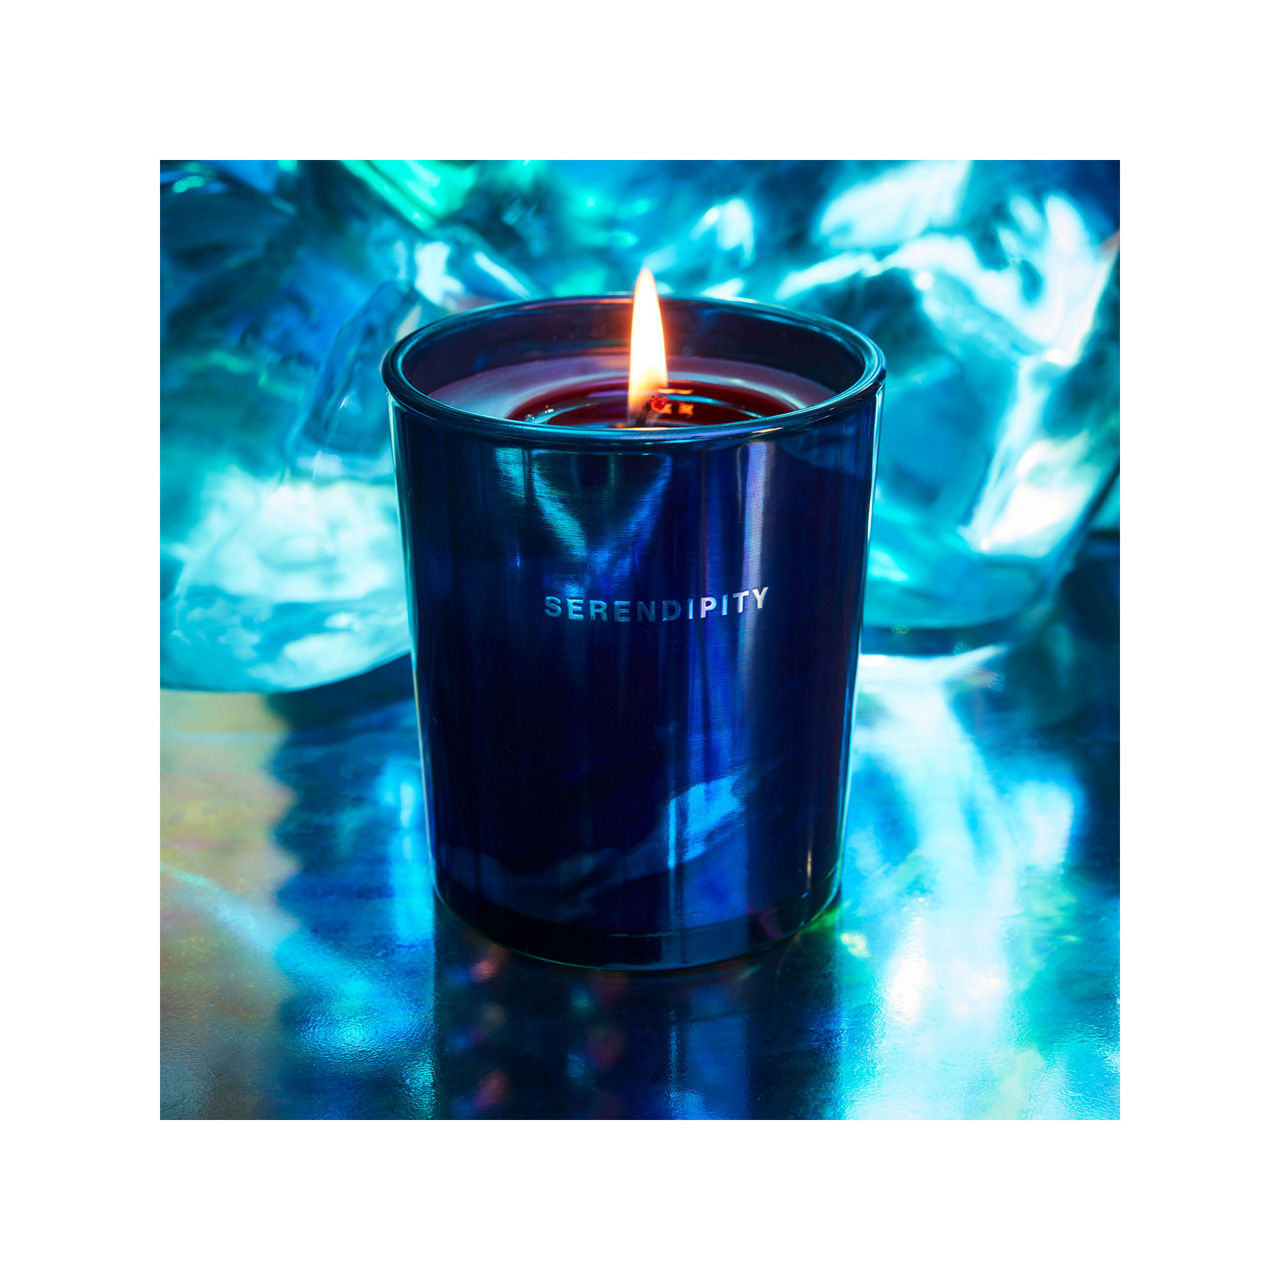 RITUALS Serendipity Scented Candle 290 g